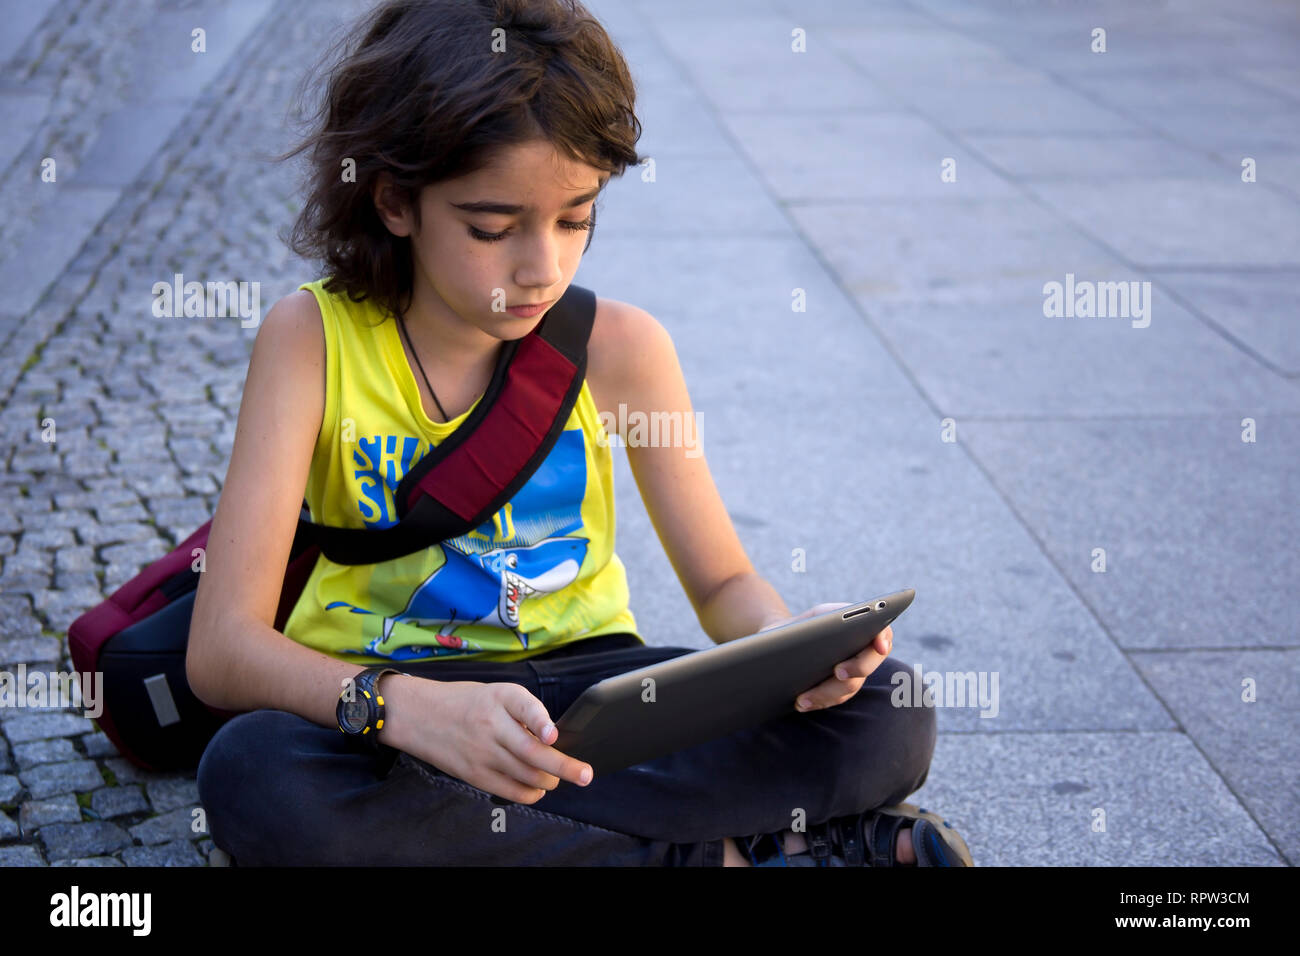 Teenage boy with long brown hair sitting outside on concrete using a tablet computer, looking down while sitting with crossed legs. Stock Photo